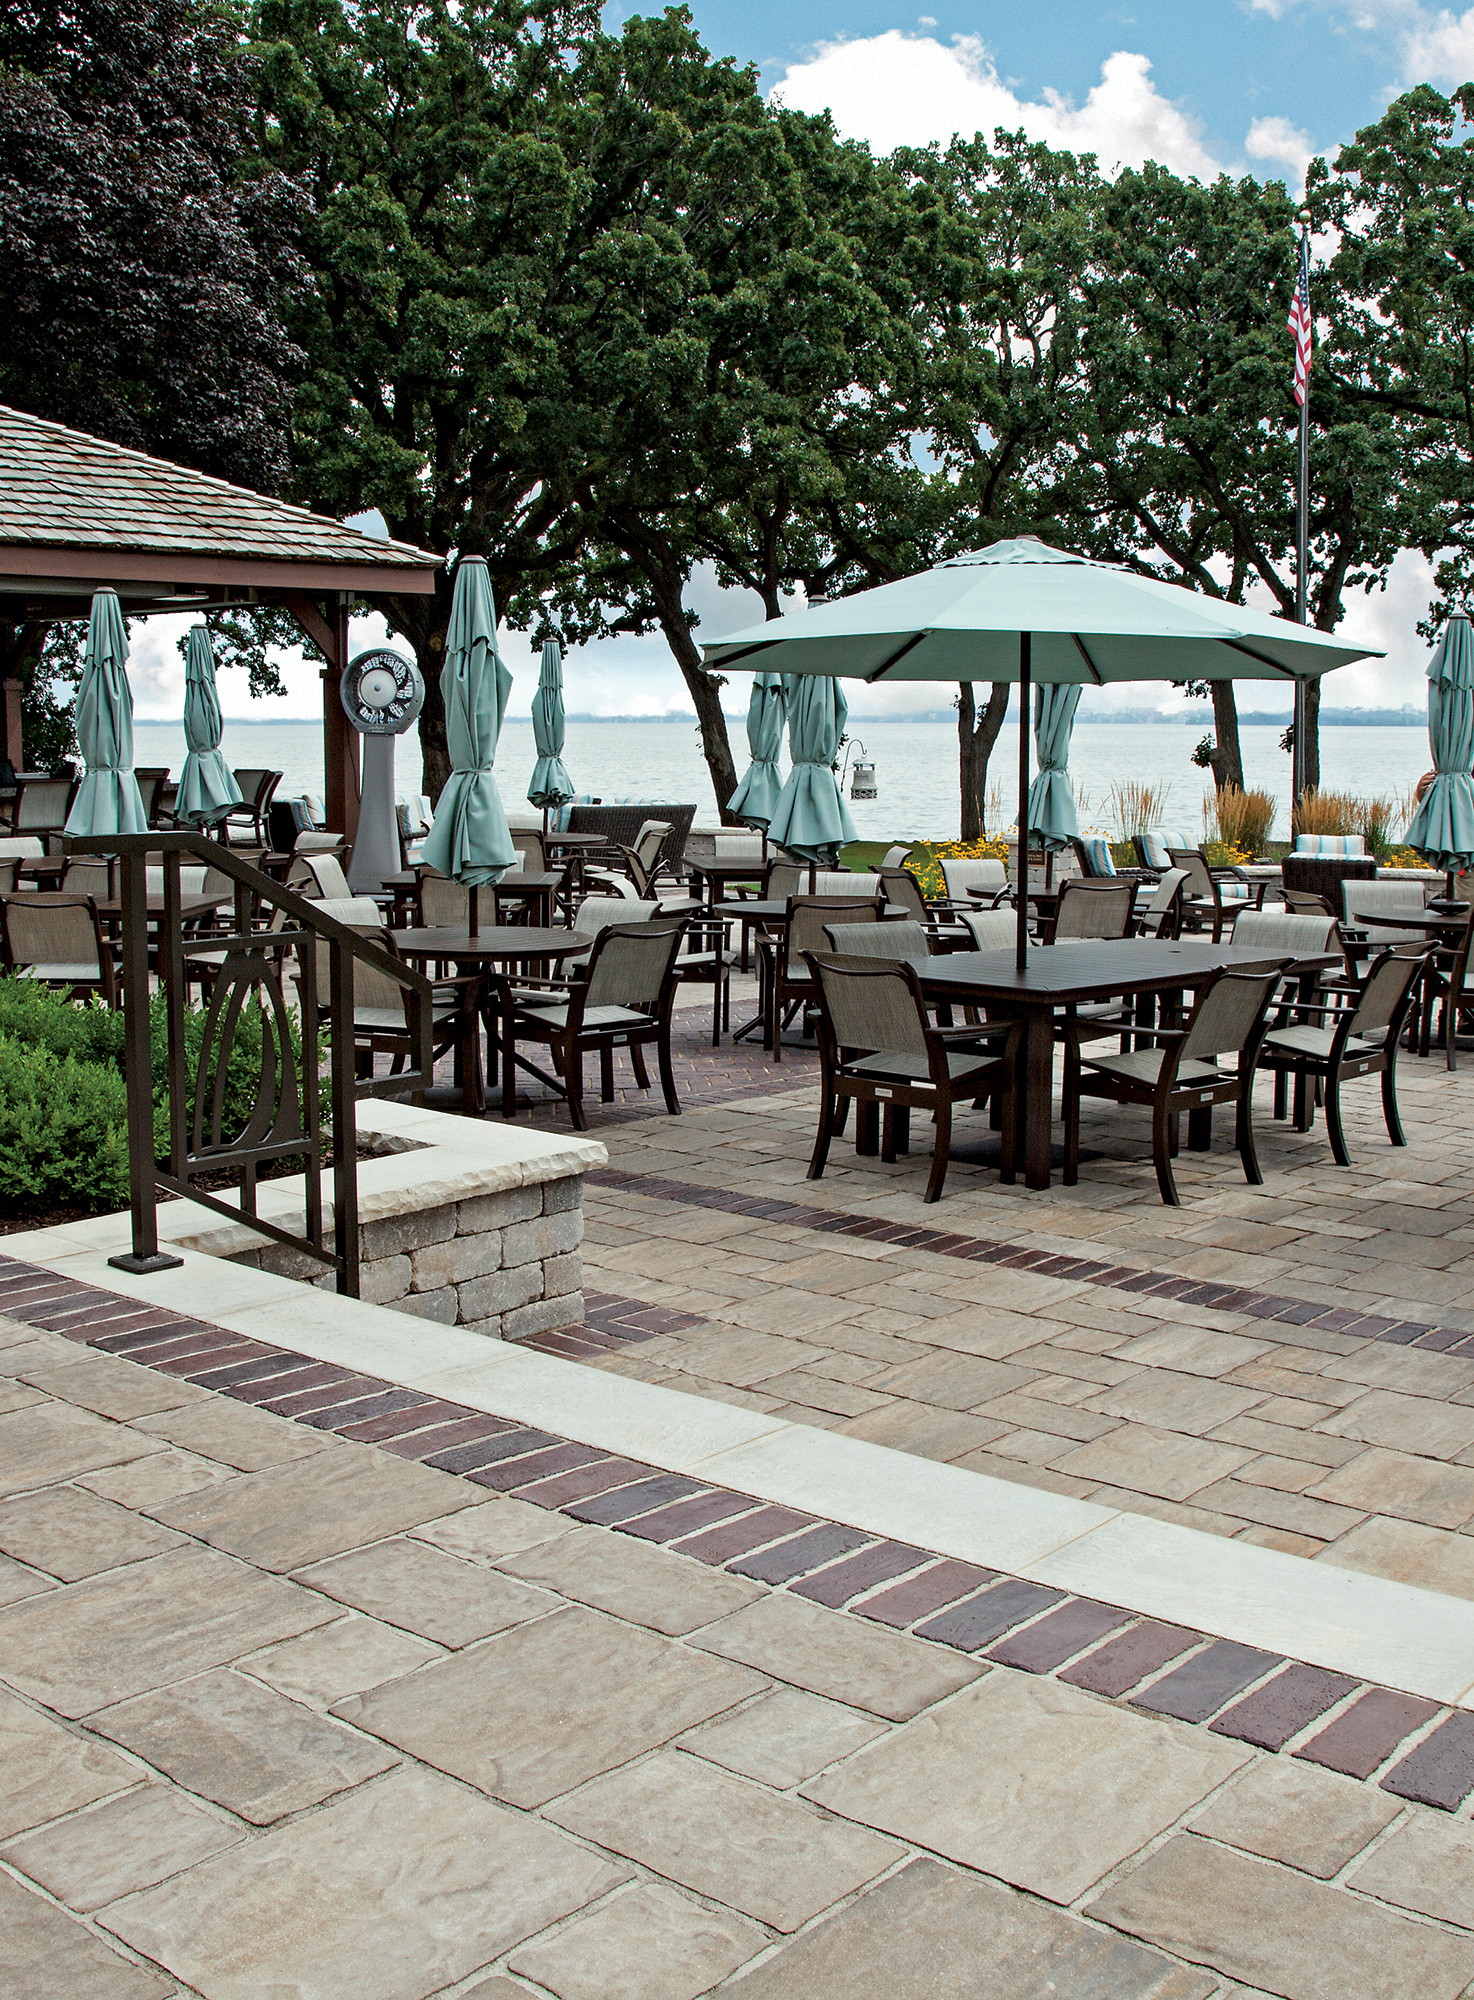 Overlooking the water, chairs and tables with umbrellas and a pavilion sit on Thornbury pavers with accents of Town Hall pavers.